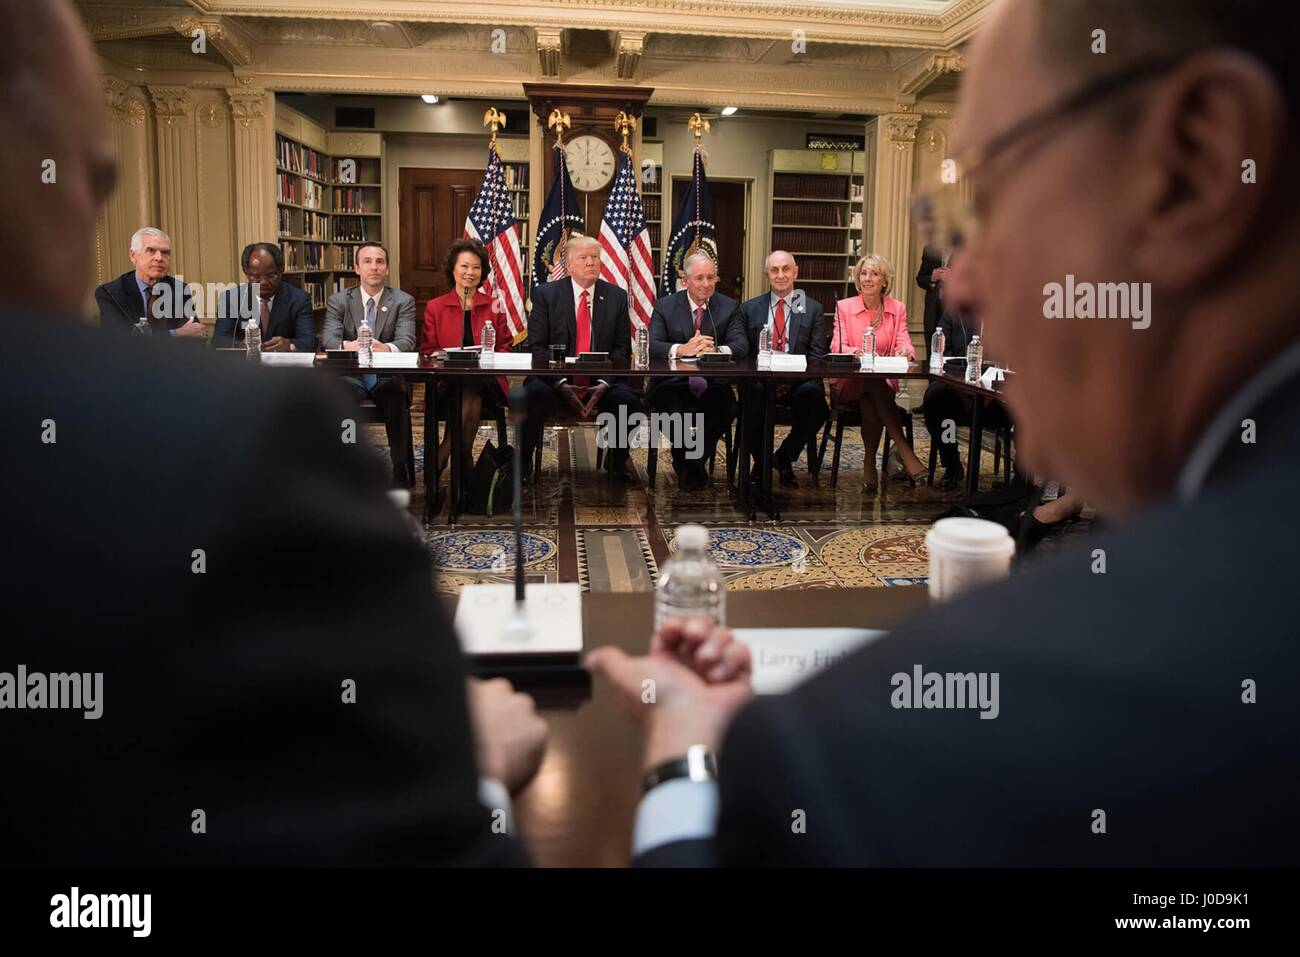 U.S President Donald Trump attends a strategic and policy discussion with business leaders in the State Department Library of the Eisenhower Executive Office Building April 11, 2017 in Washington, DC. Sitting alongside the president Left to Right are: Common Good founder Philip Howard, Bayo Ogunlesi of Global Infrastructure Partners, assistant to the president for intragovernmental and technology initiatives, Secretary of Transportation Elaine Chao, President Donald Trump, CEO of Blackstone Stephen Schwarzman, right, Chris Liddell, the assistant to the president for strategic initiatives, and  Stock Photo